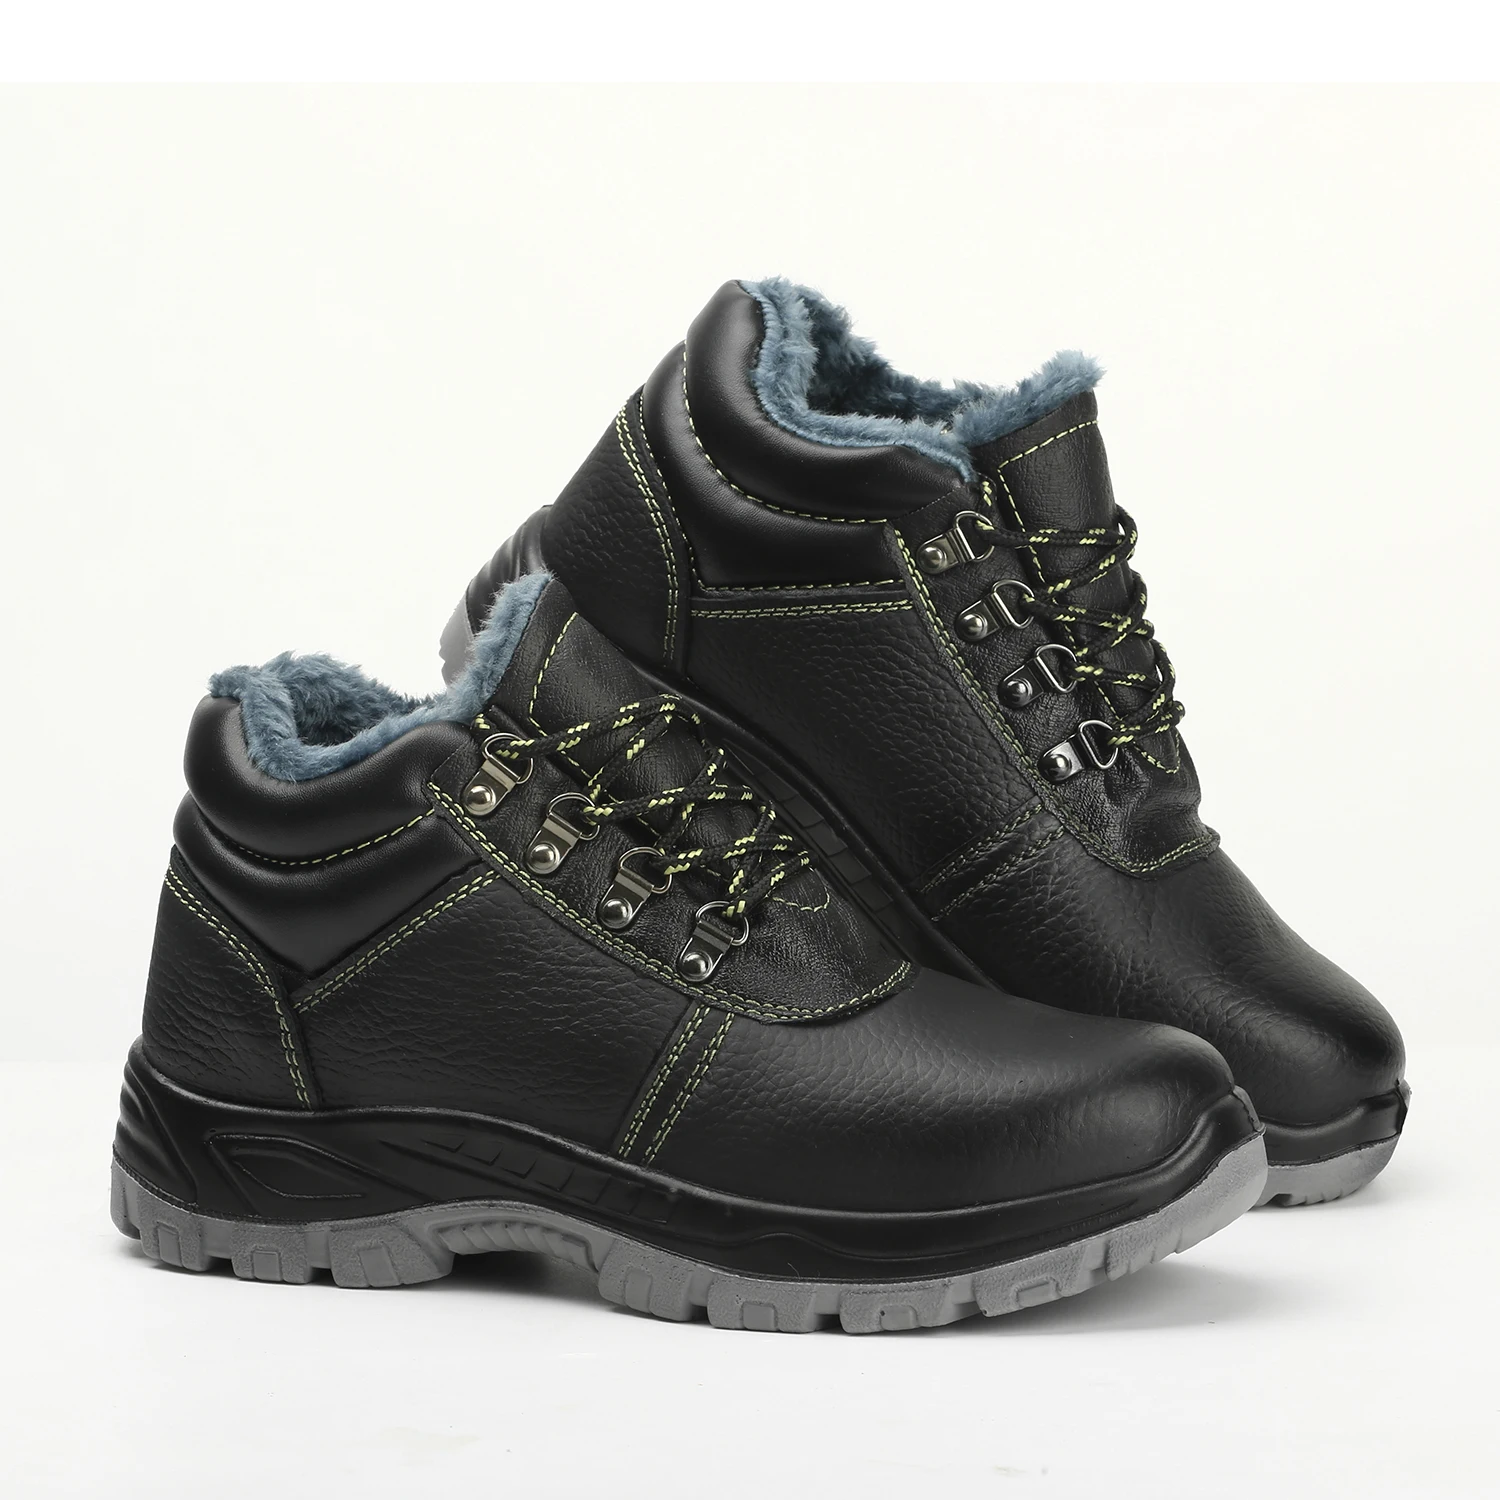 Winter Thermal Double Density Polyurethane Sole Upper Leather ...